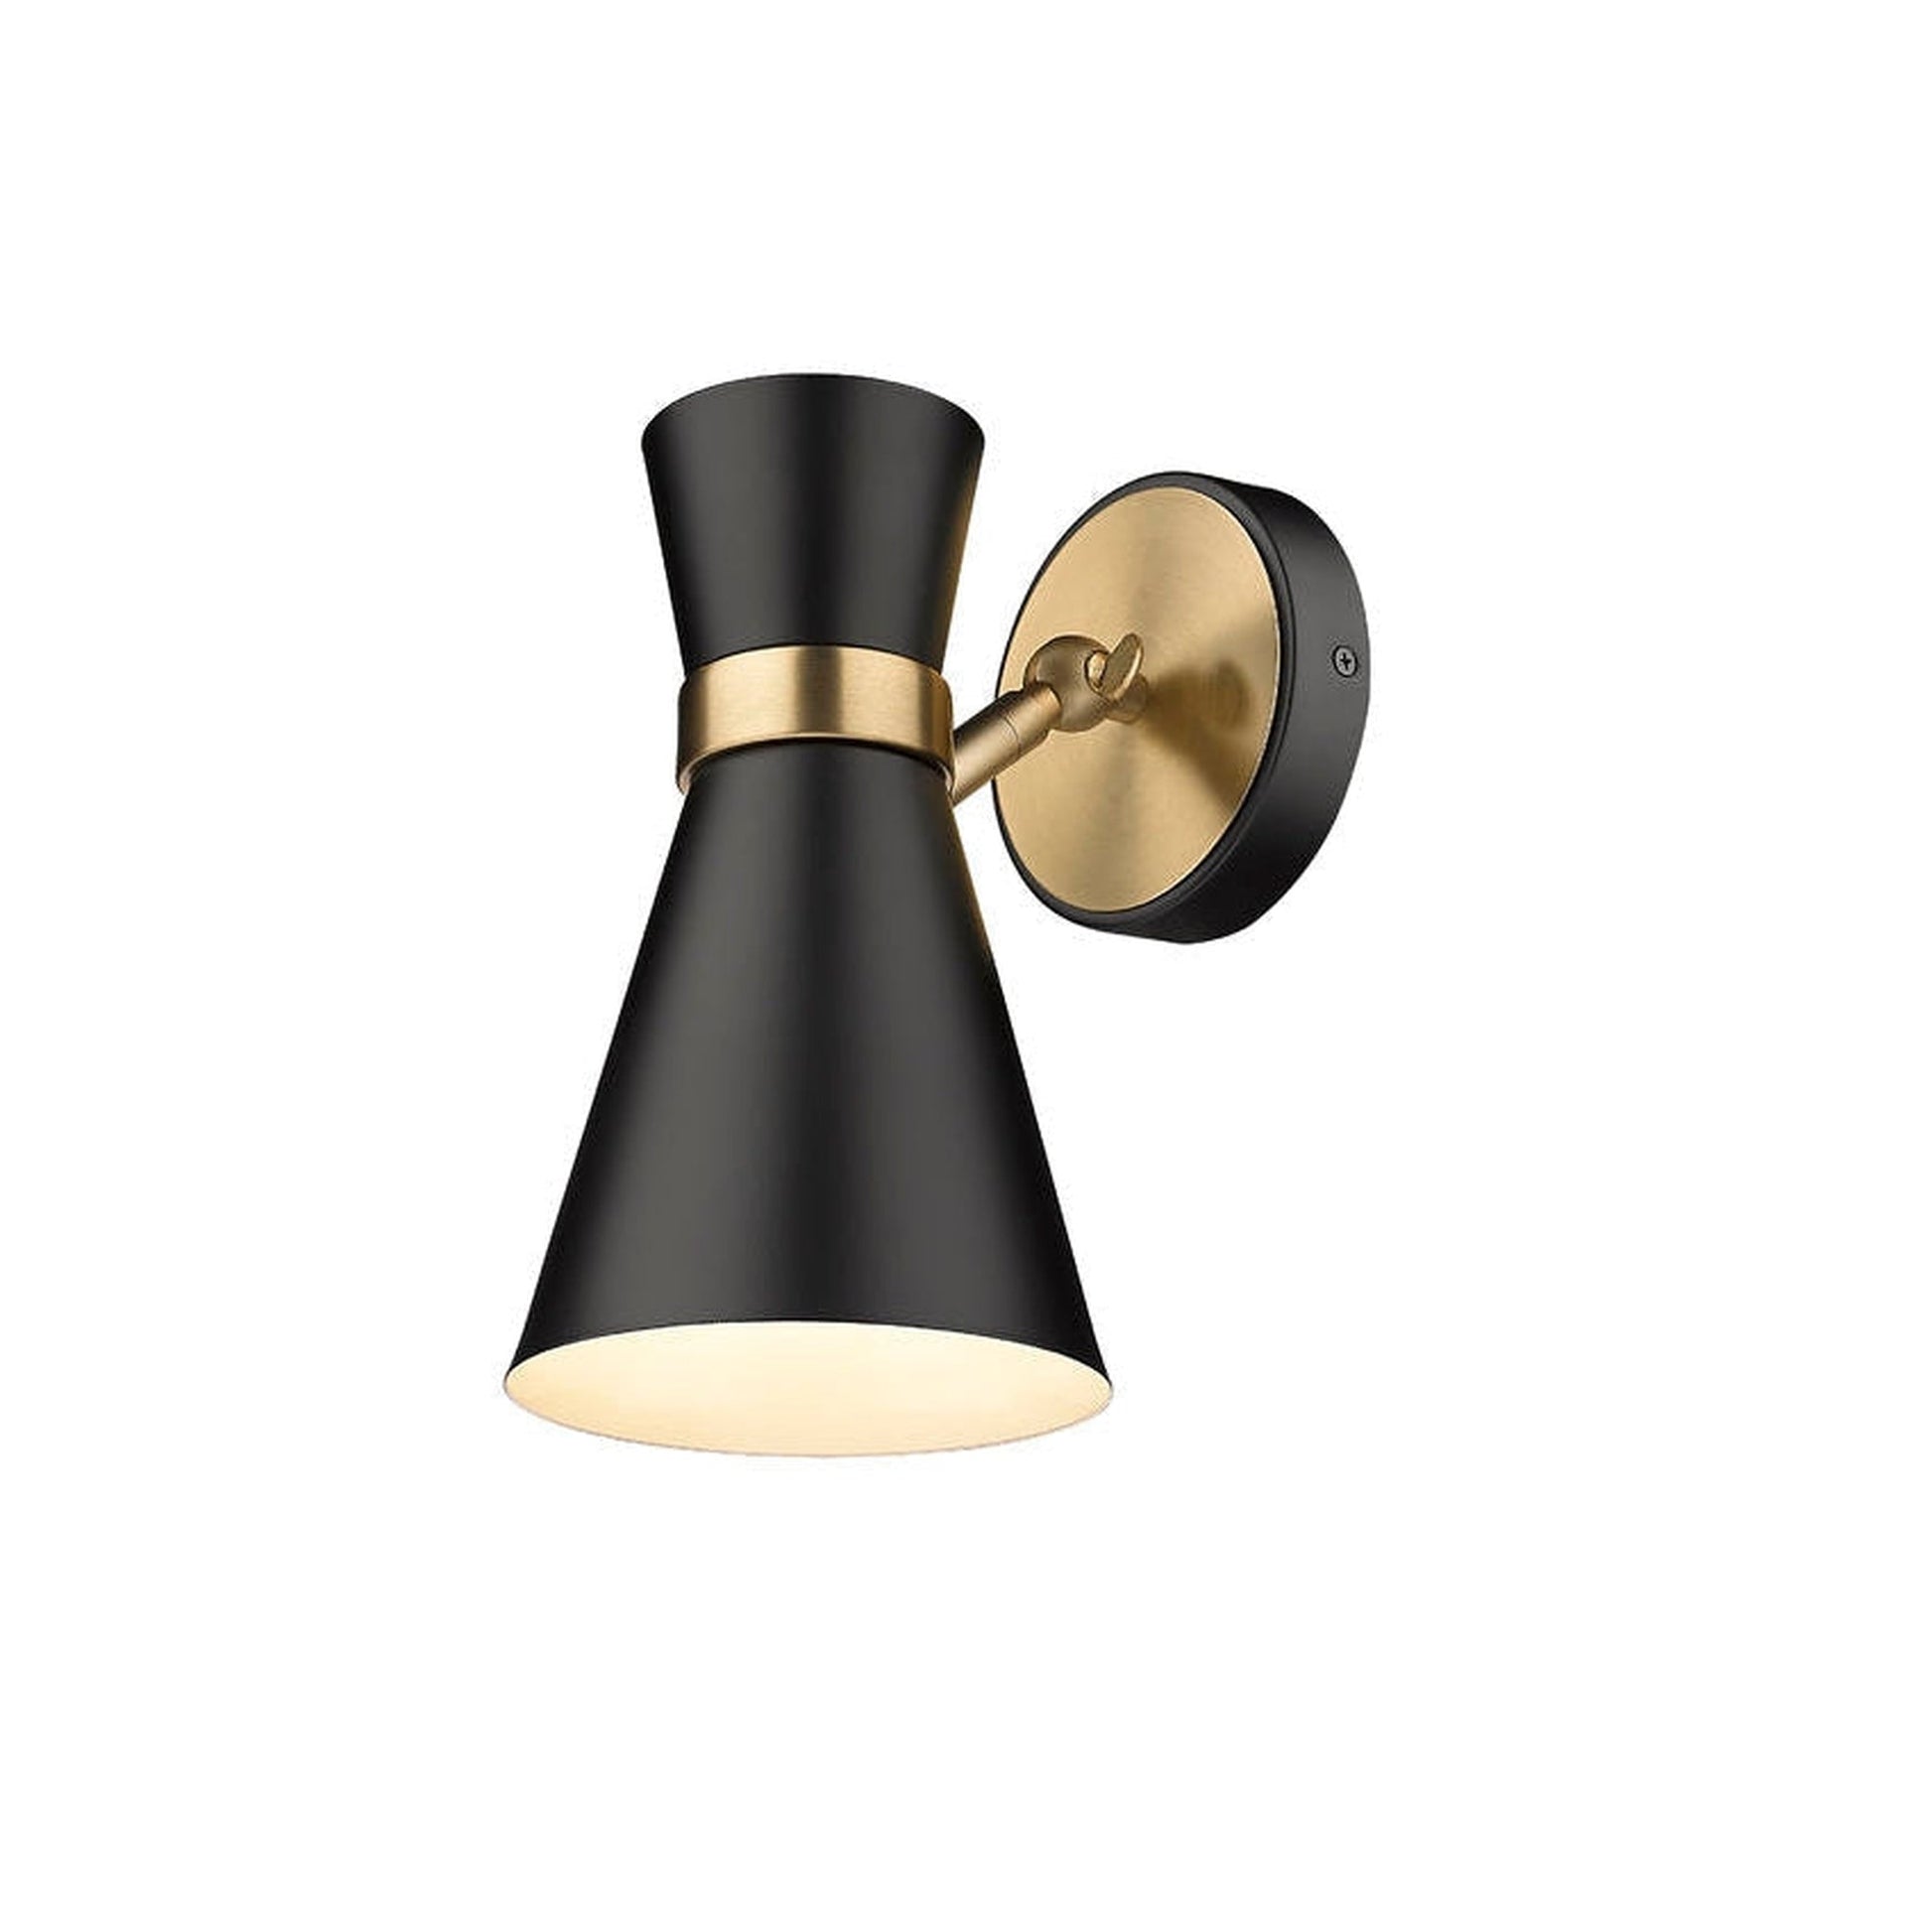 Z-Lite Soriano 6" 1-Light Matte Black and Heritage Brass Wall Sconce With Matte Black Metal Shade